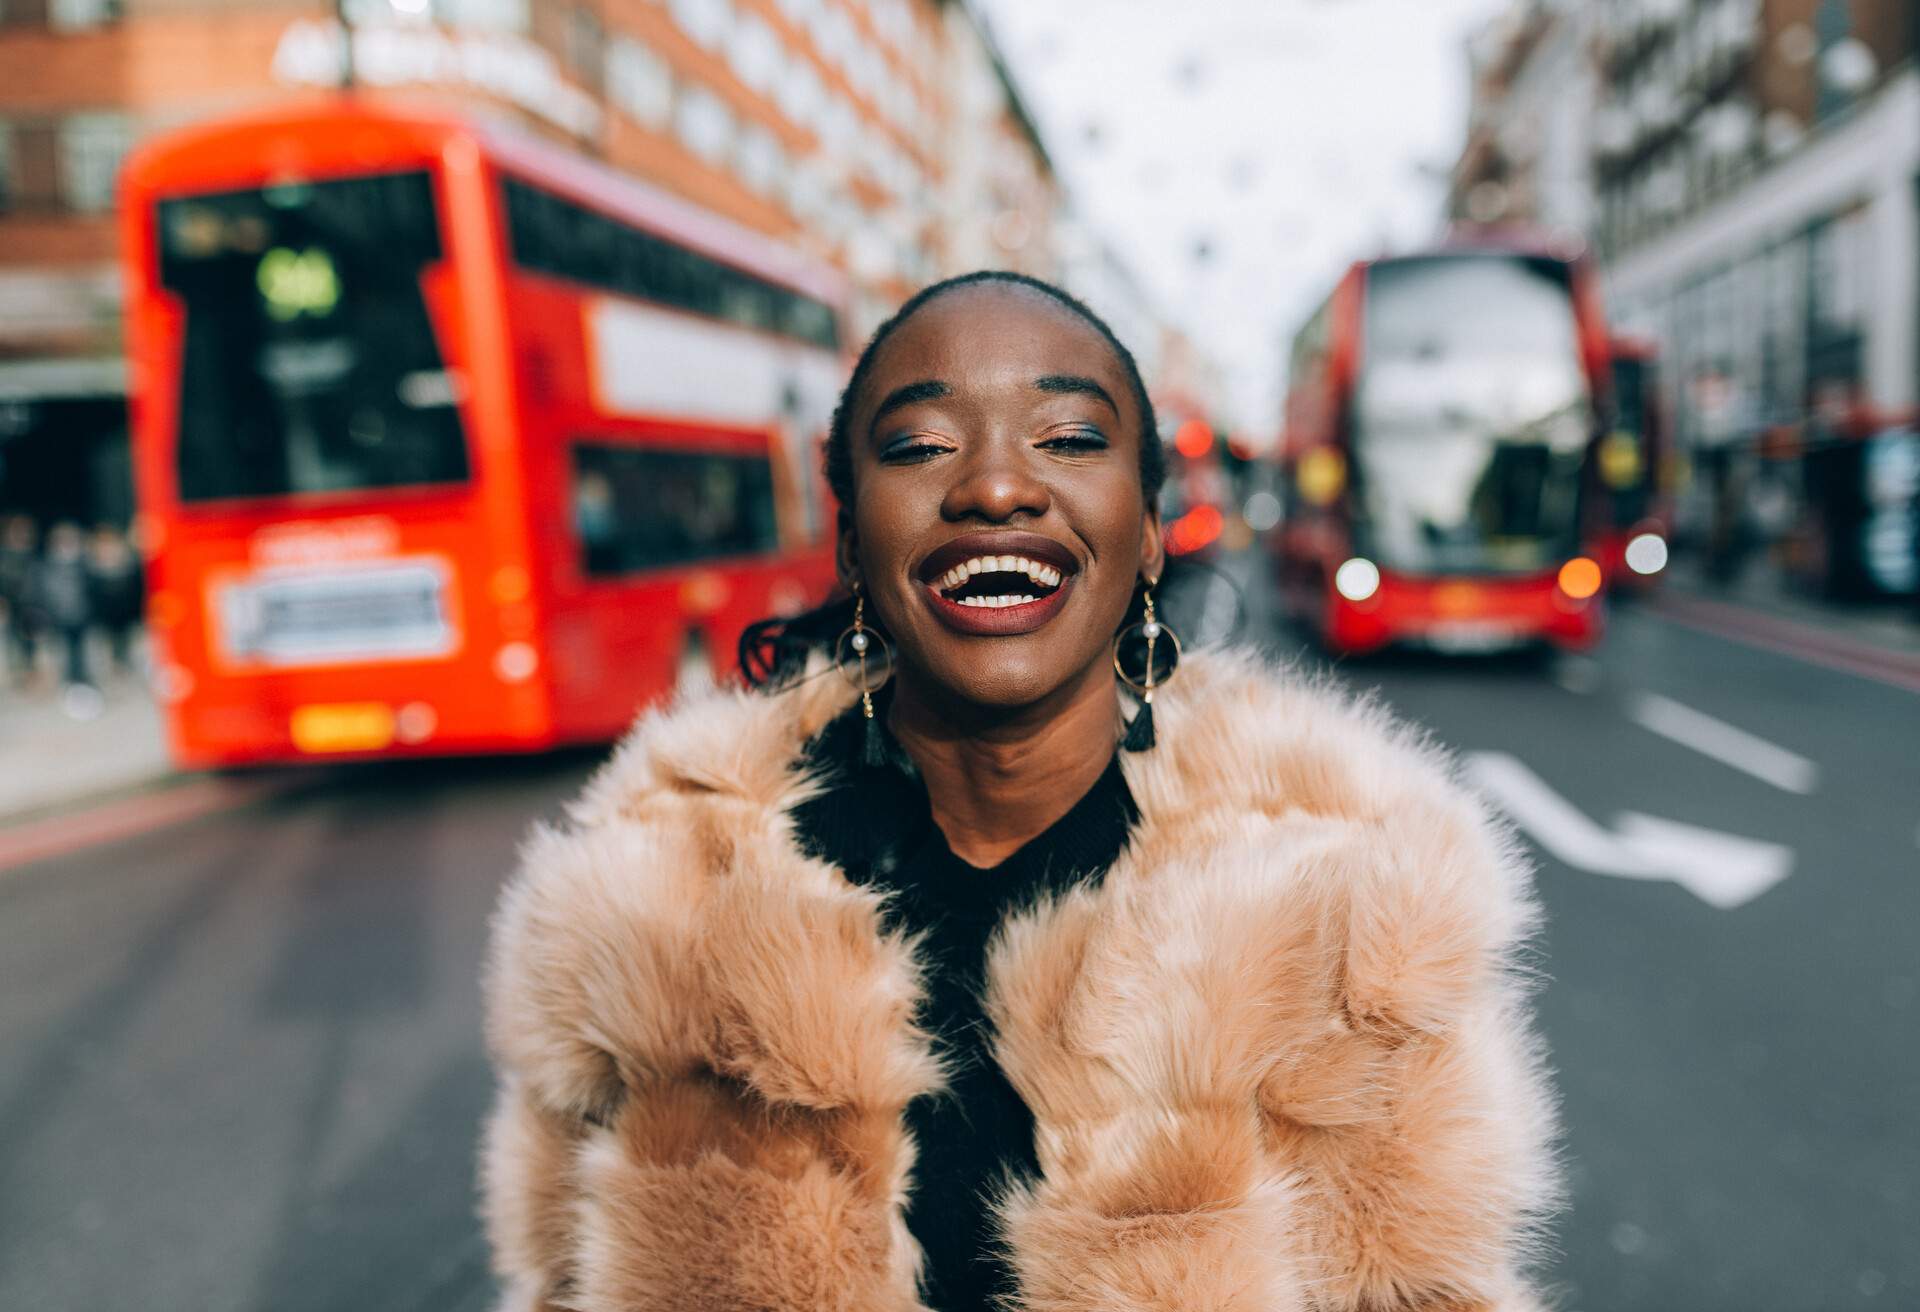 DEST_UK_ENGLAND_LONDON_PEOPLE_WOMAN_LAUGHING_OXFORD_STREET_BUS_GettyImages-1054835750 copy